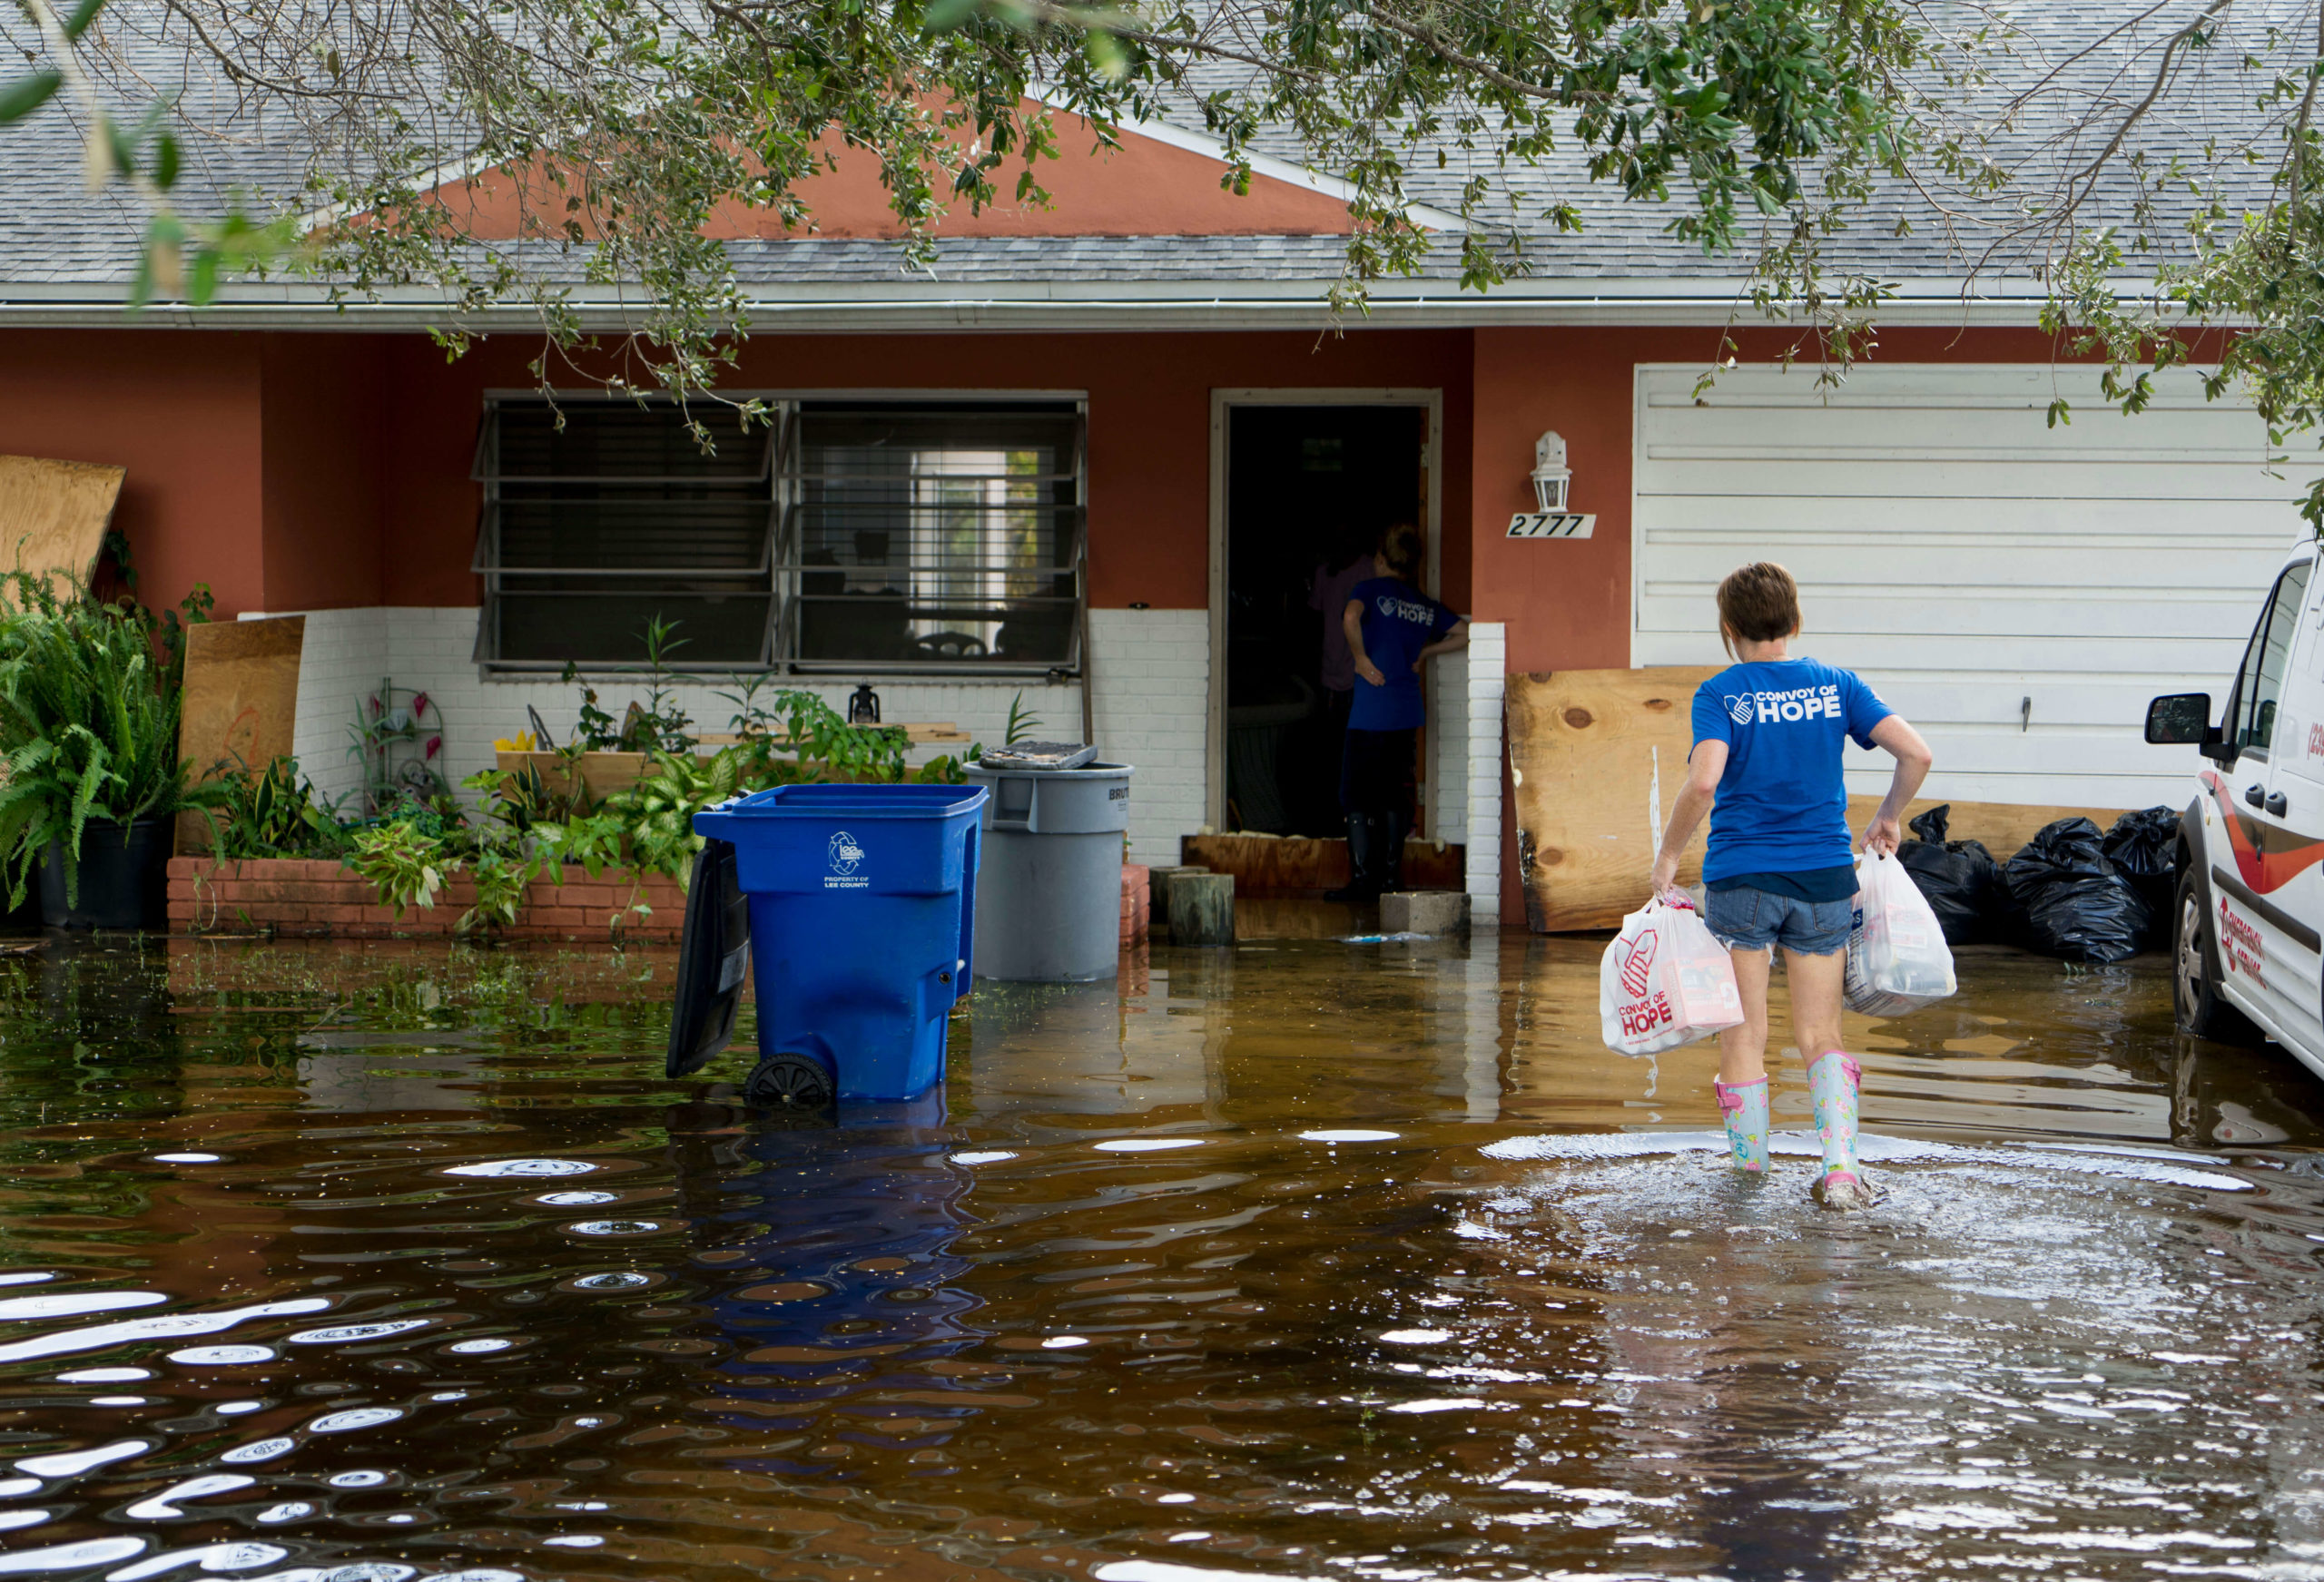 Disaster relief delivered through floodwaters created by Hurricane Irma